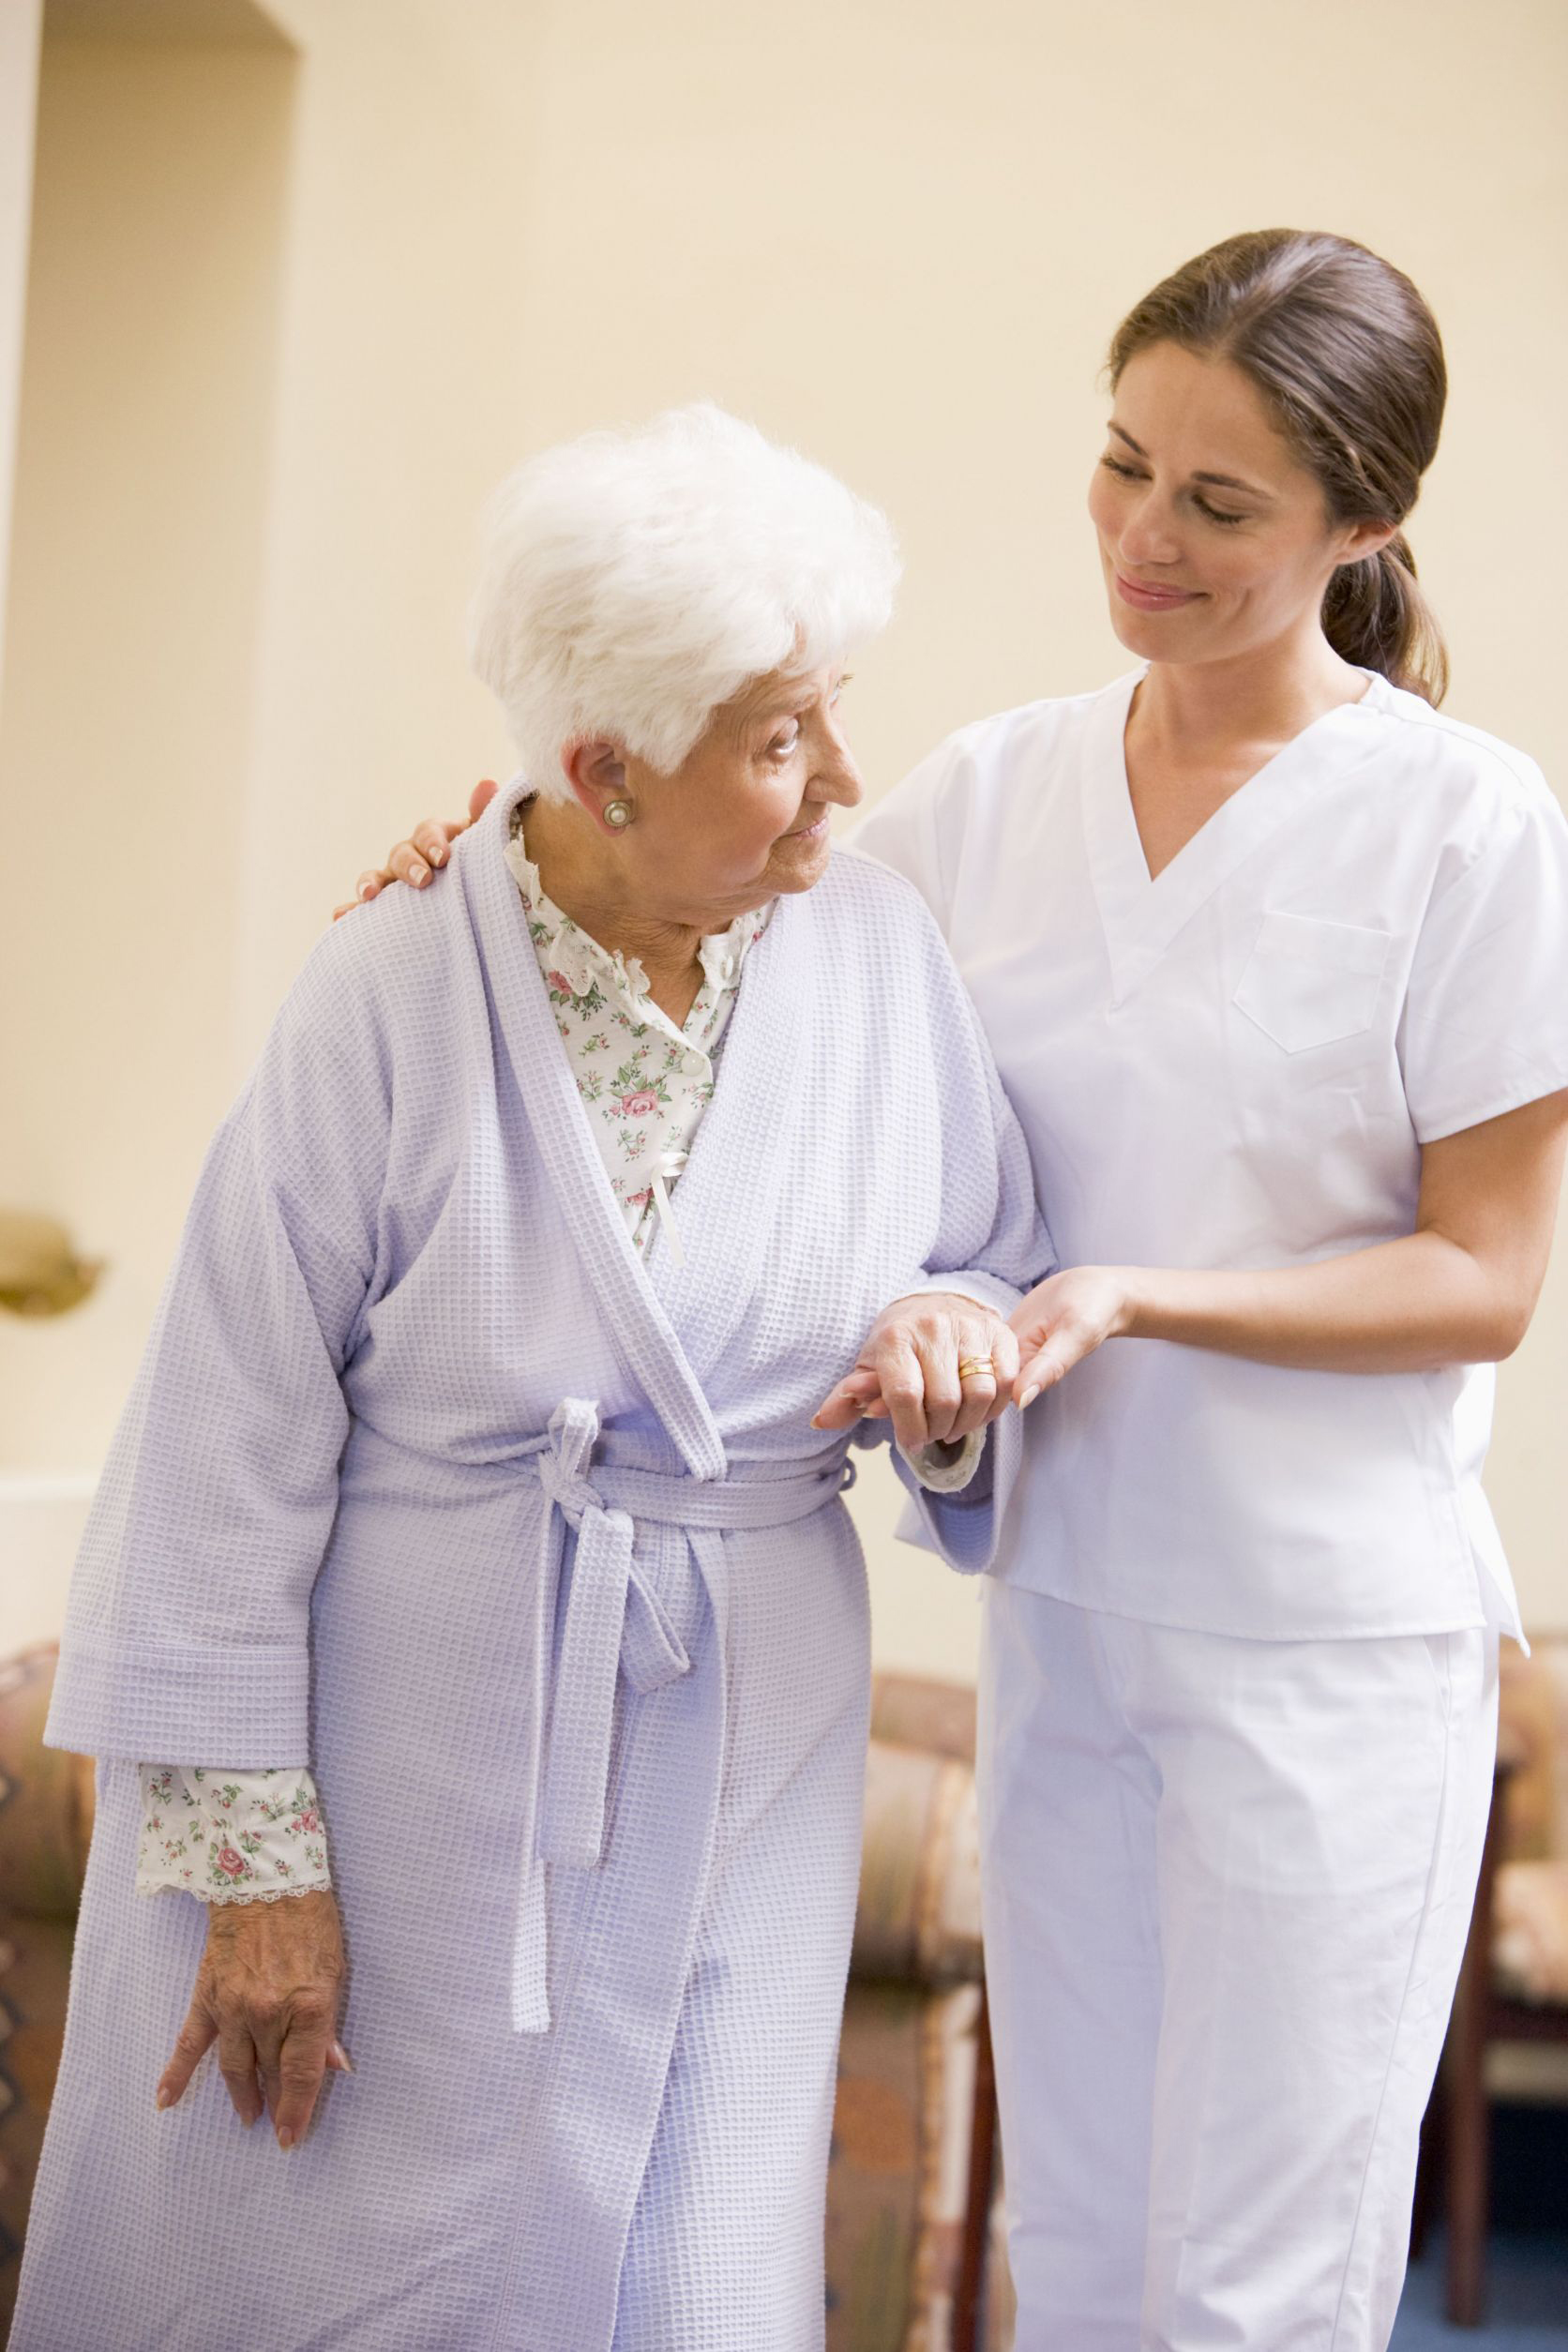 Benefits of In-Home Care in Washington, DC